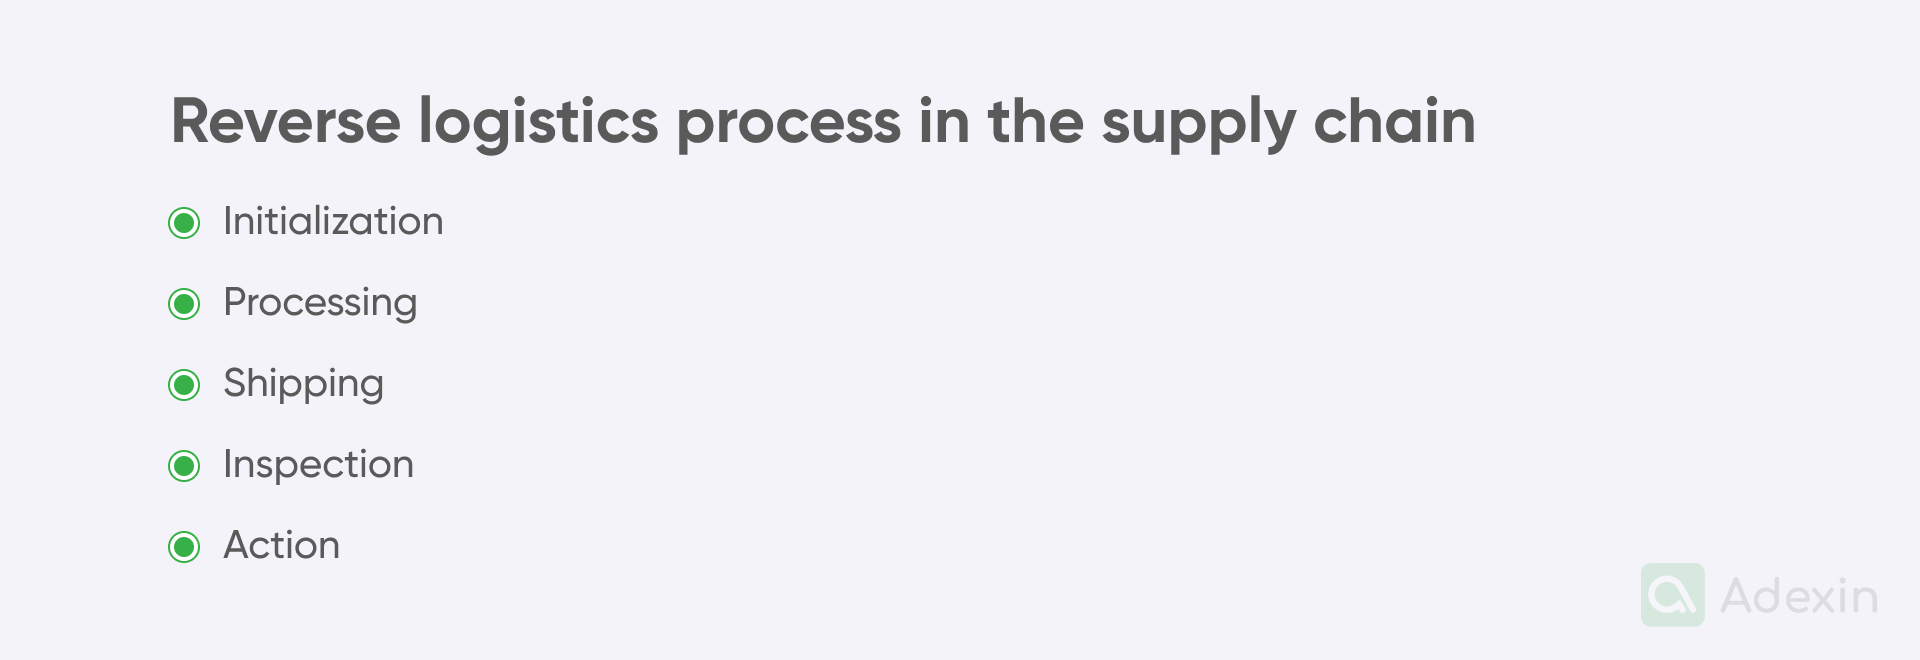 Reverse logistics process in the supply chain